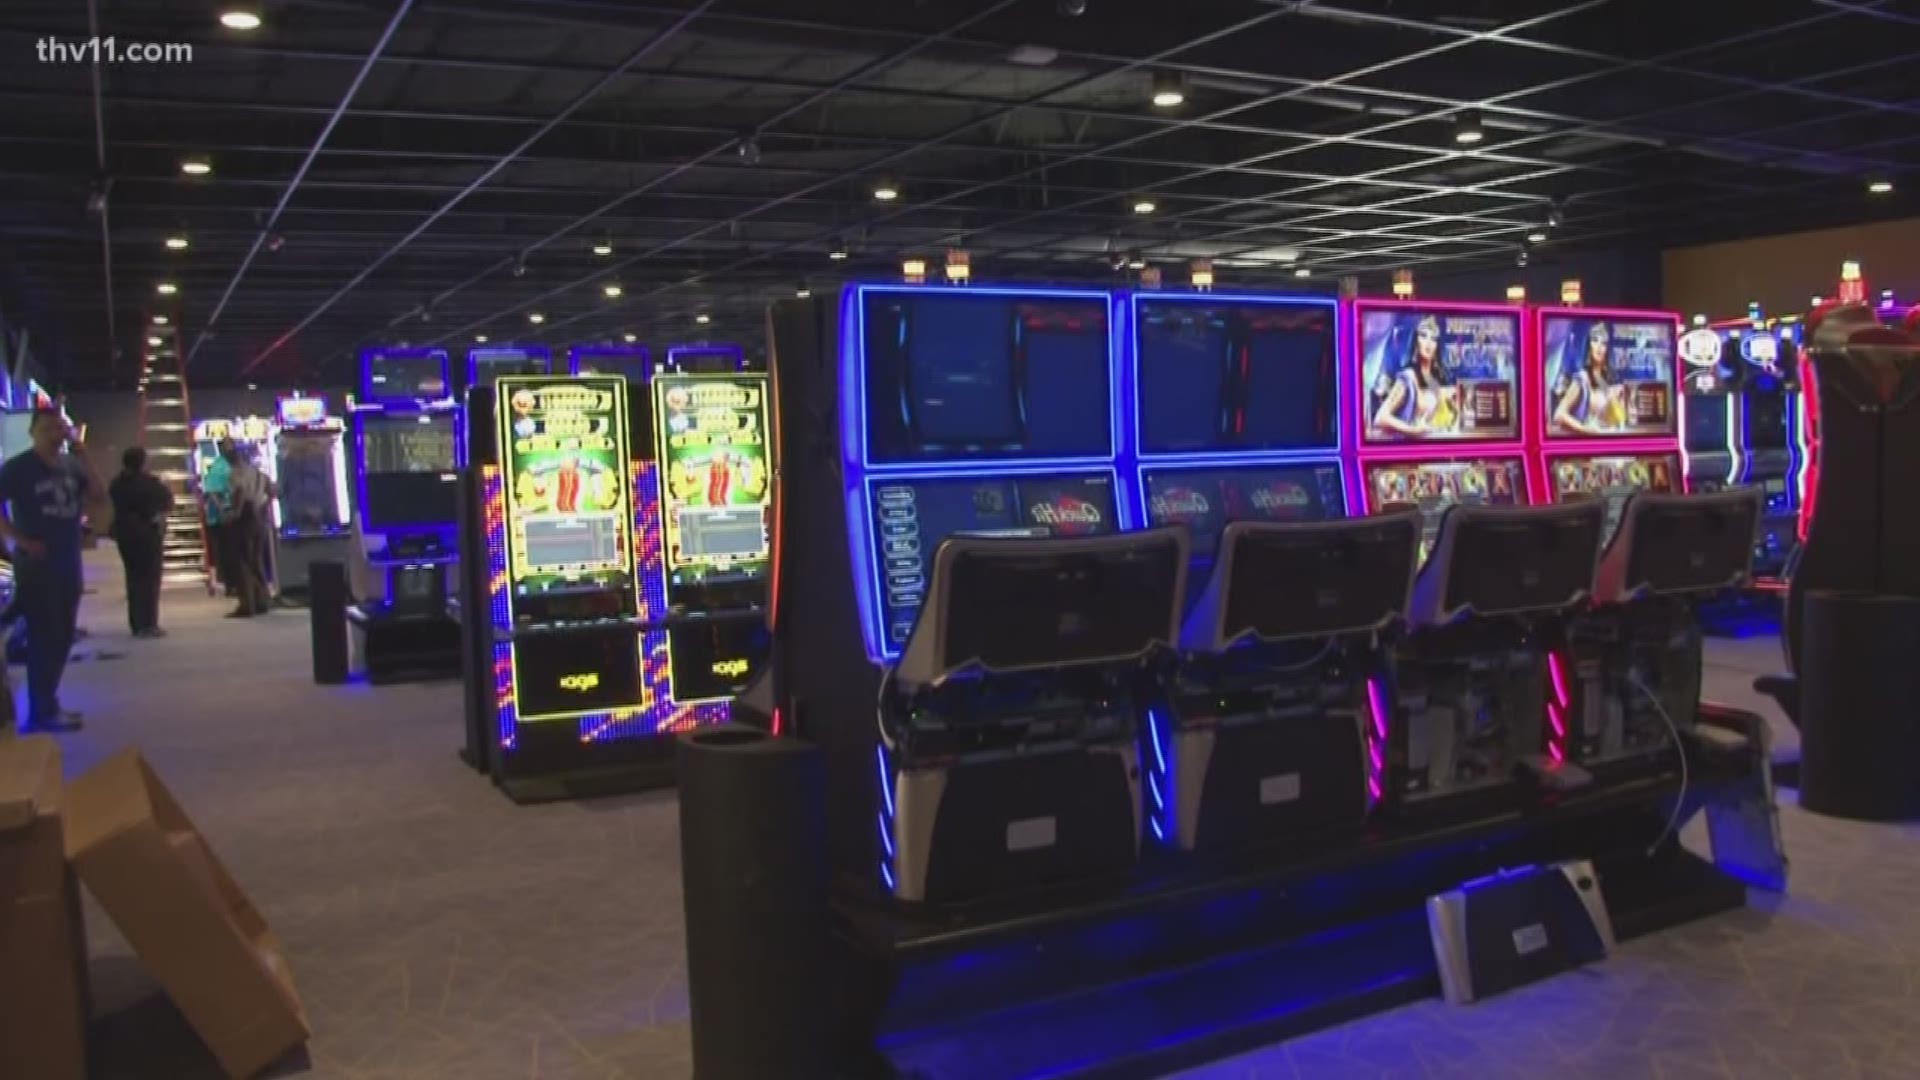 You won't have to wait until June to get a taste of the Saracen Casino Resort in Pine Bluff. In just two weeks, the casino's annex will open its doors.